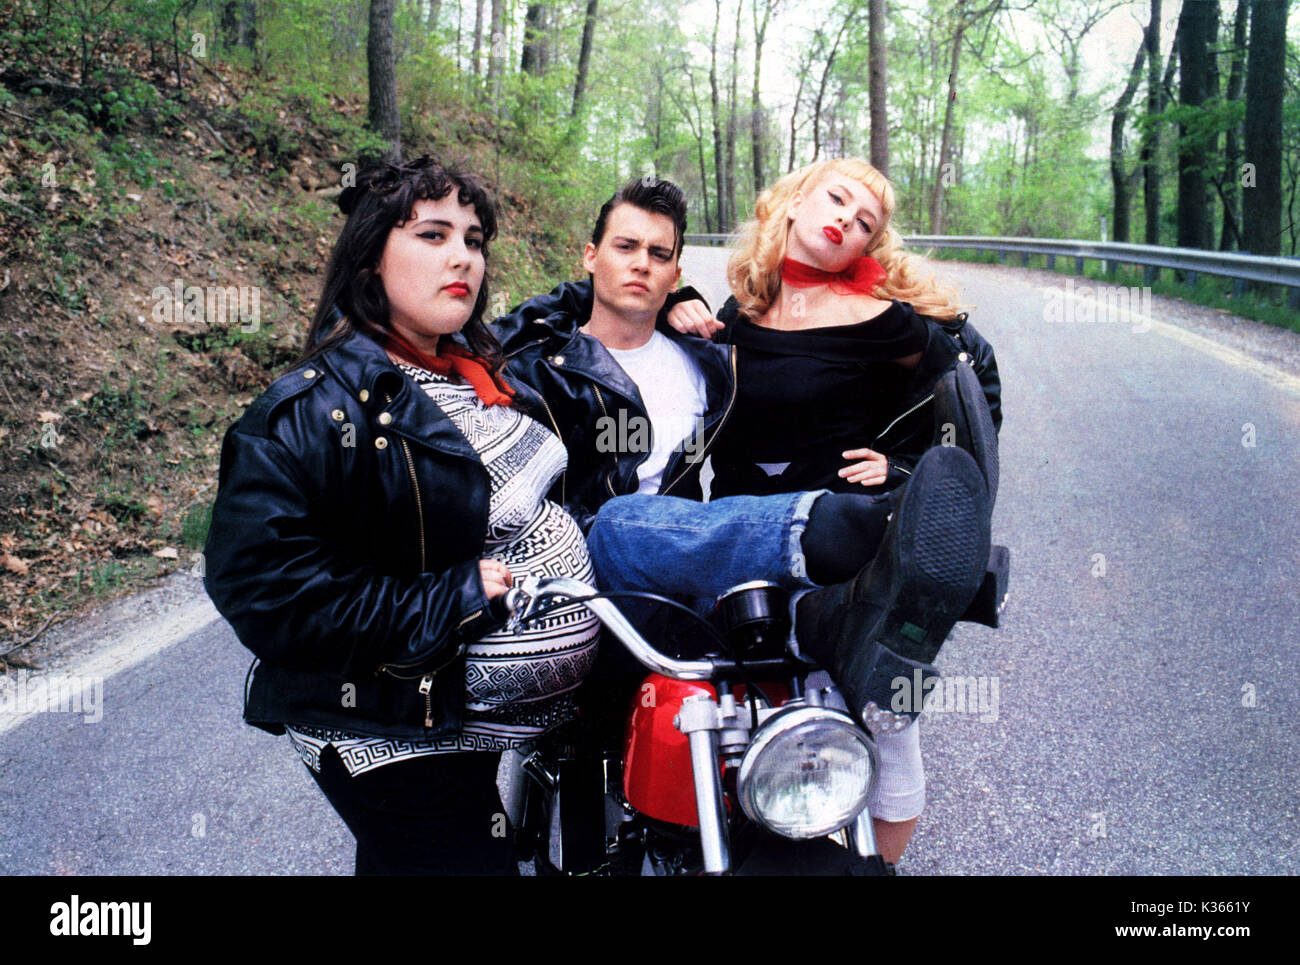 CRY-BABY UNIVERSAL PICTURES RICKI LAKE, JOHNNY DEPP, TRACI LORDS     Date: 1990 Stock Photo